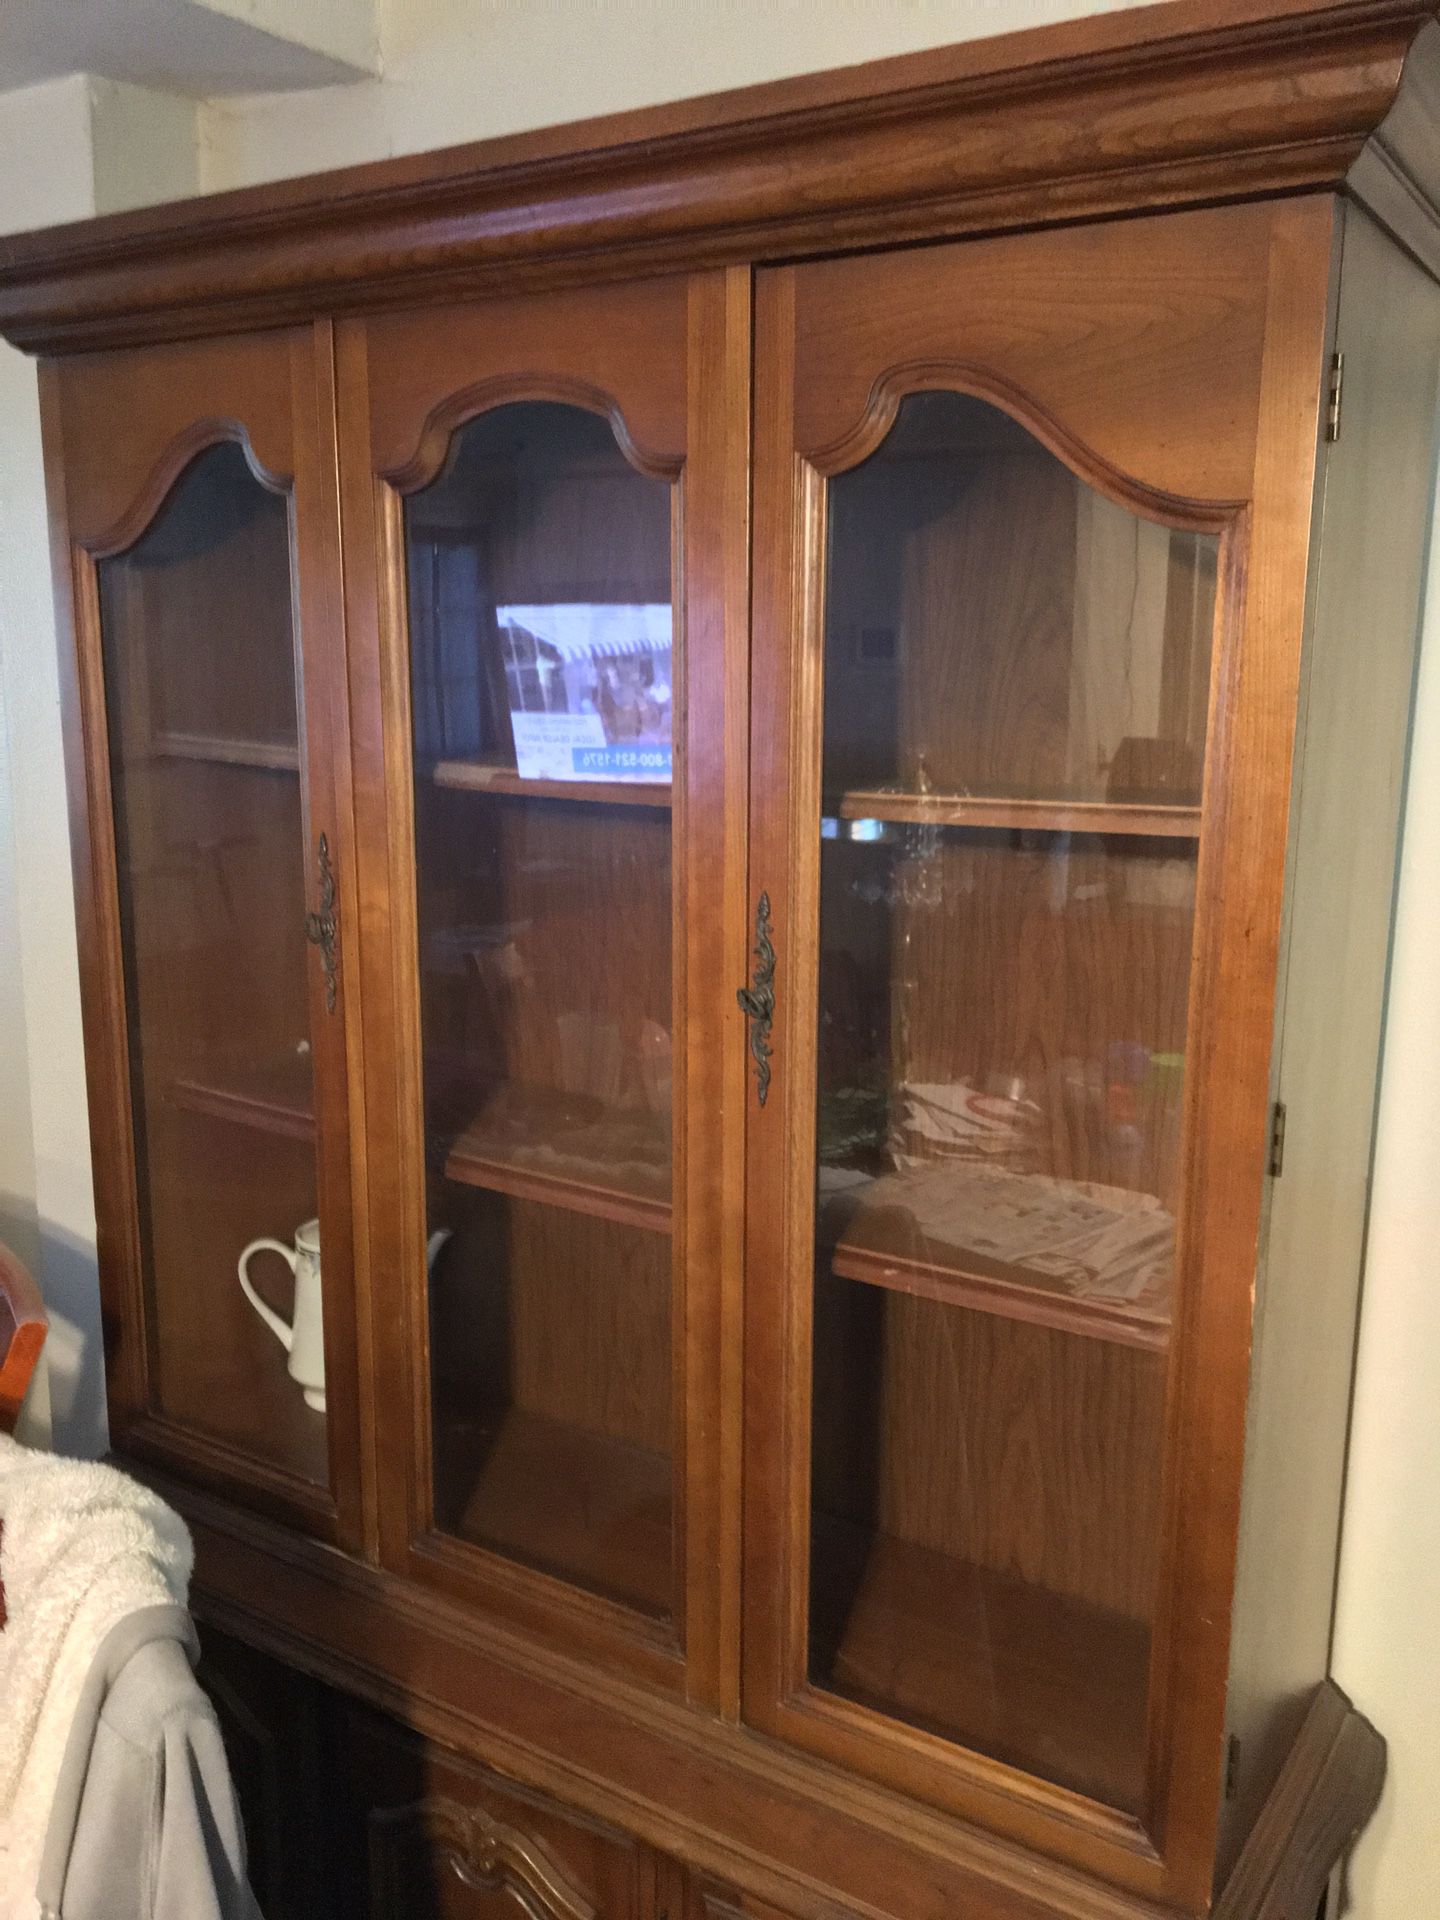 Excellent Condition China cabinet